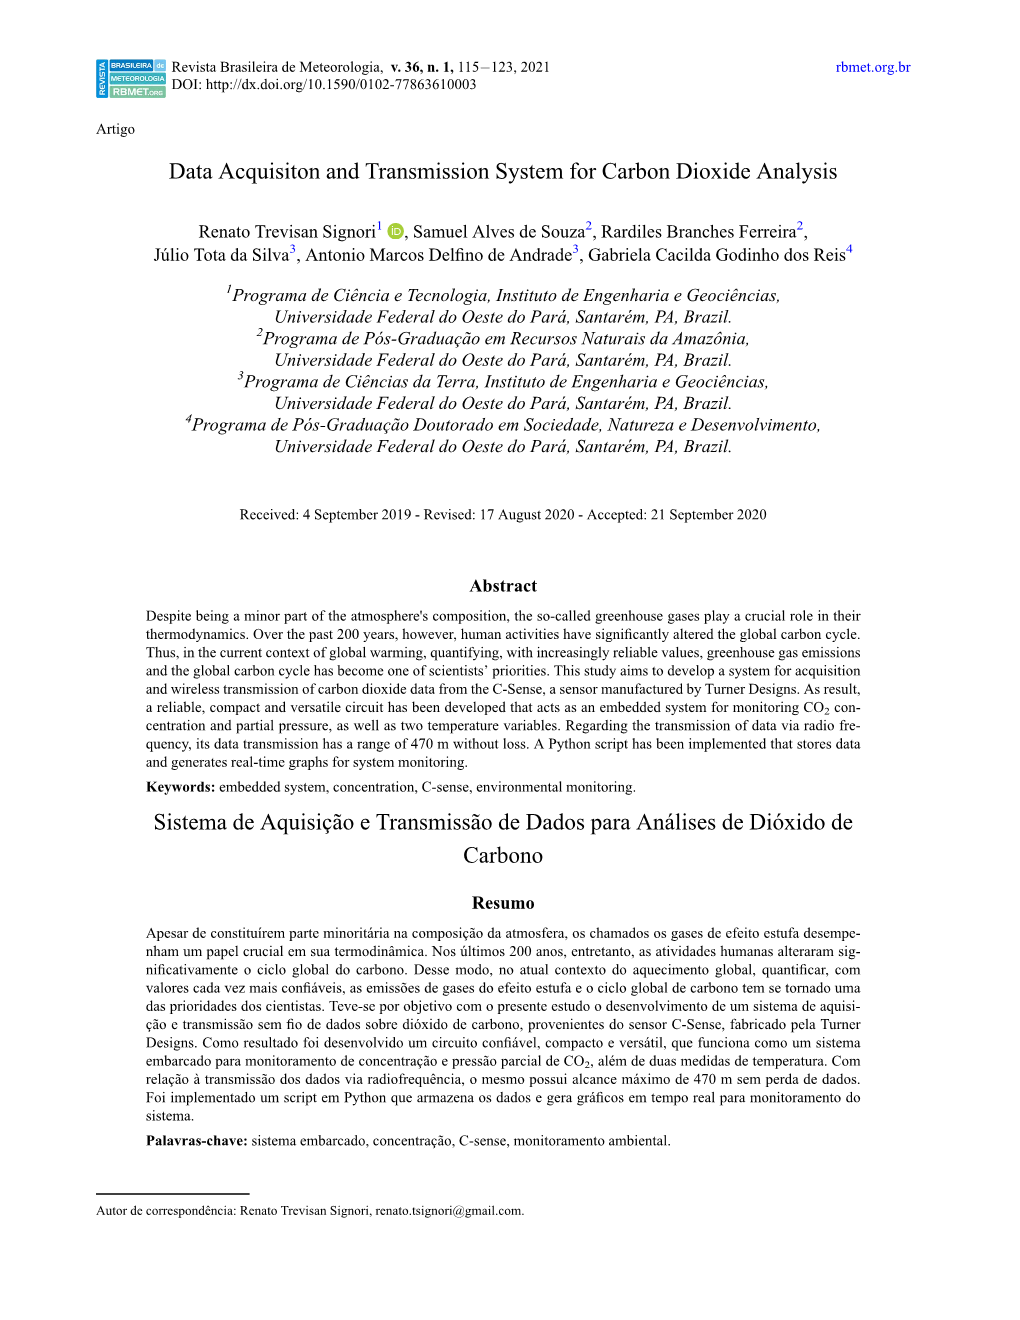 Data Acquisiton and Transmission System for Carbon Dioxide Analysis